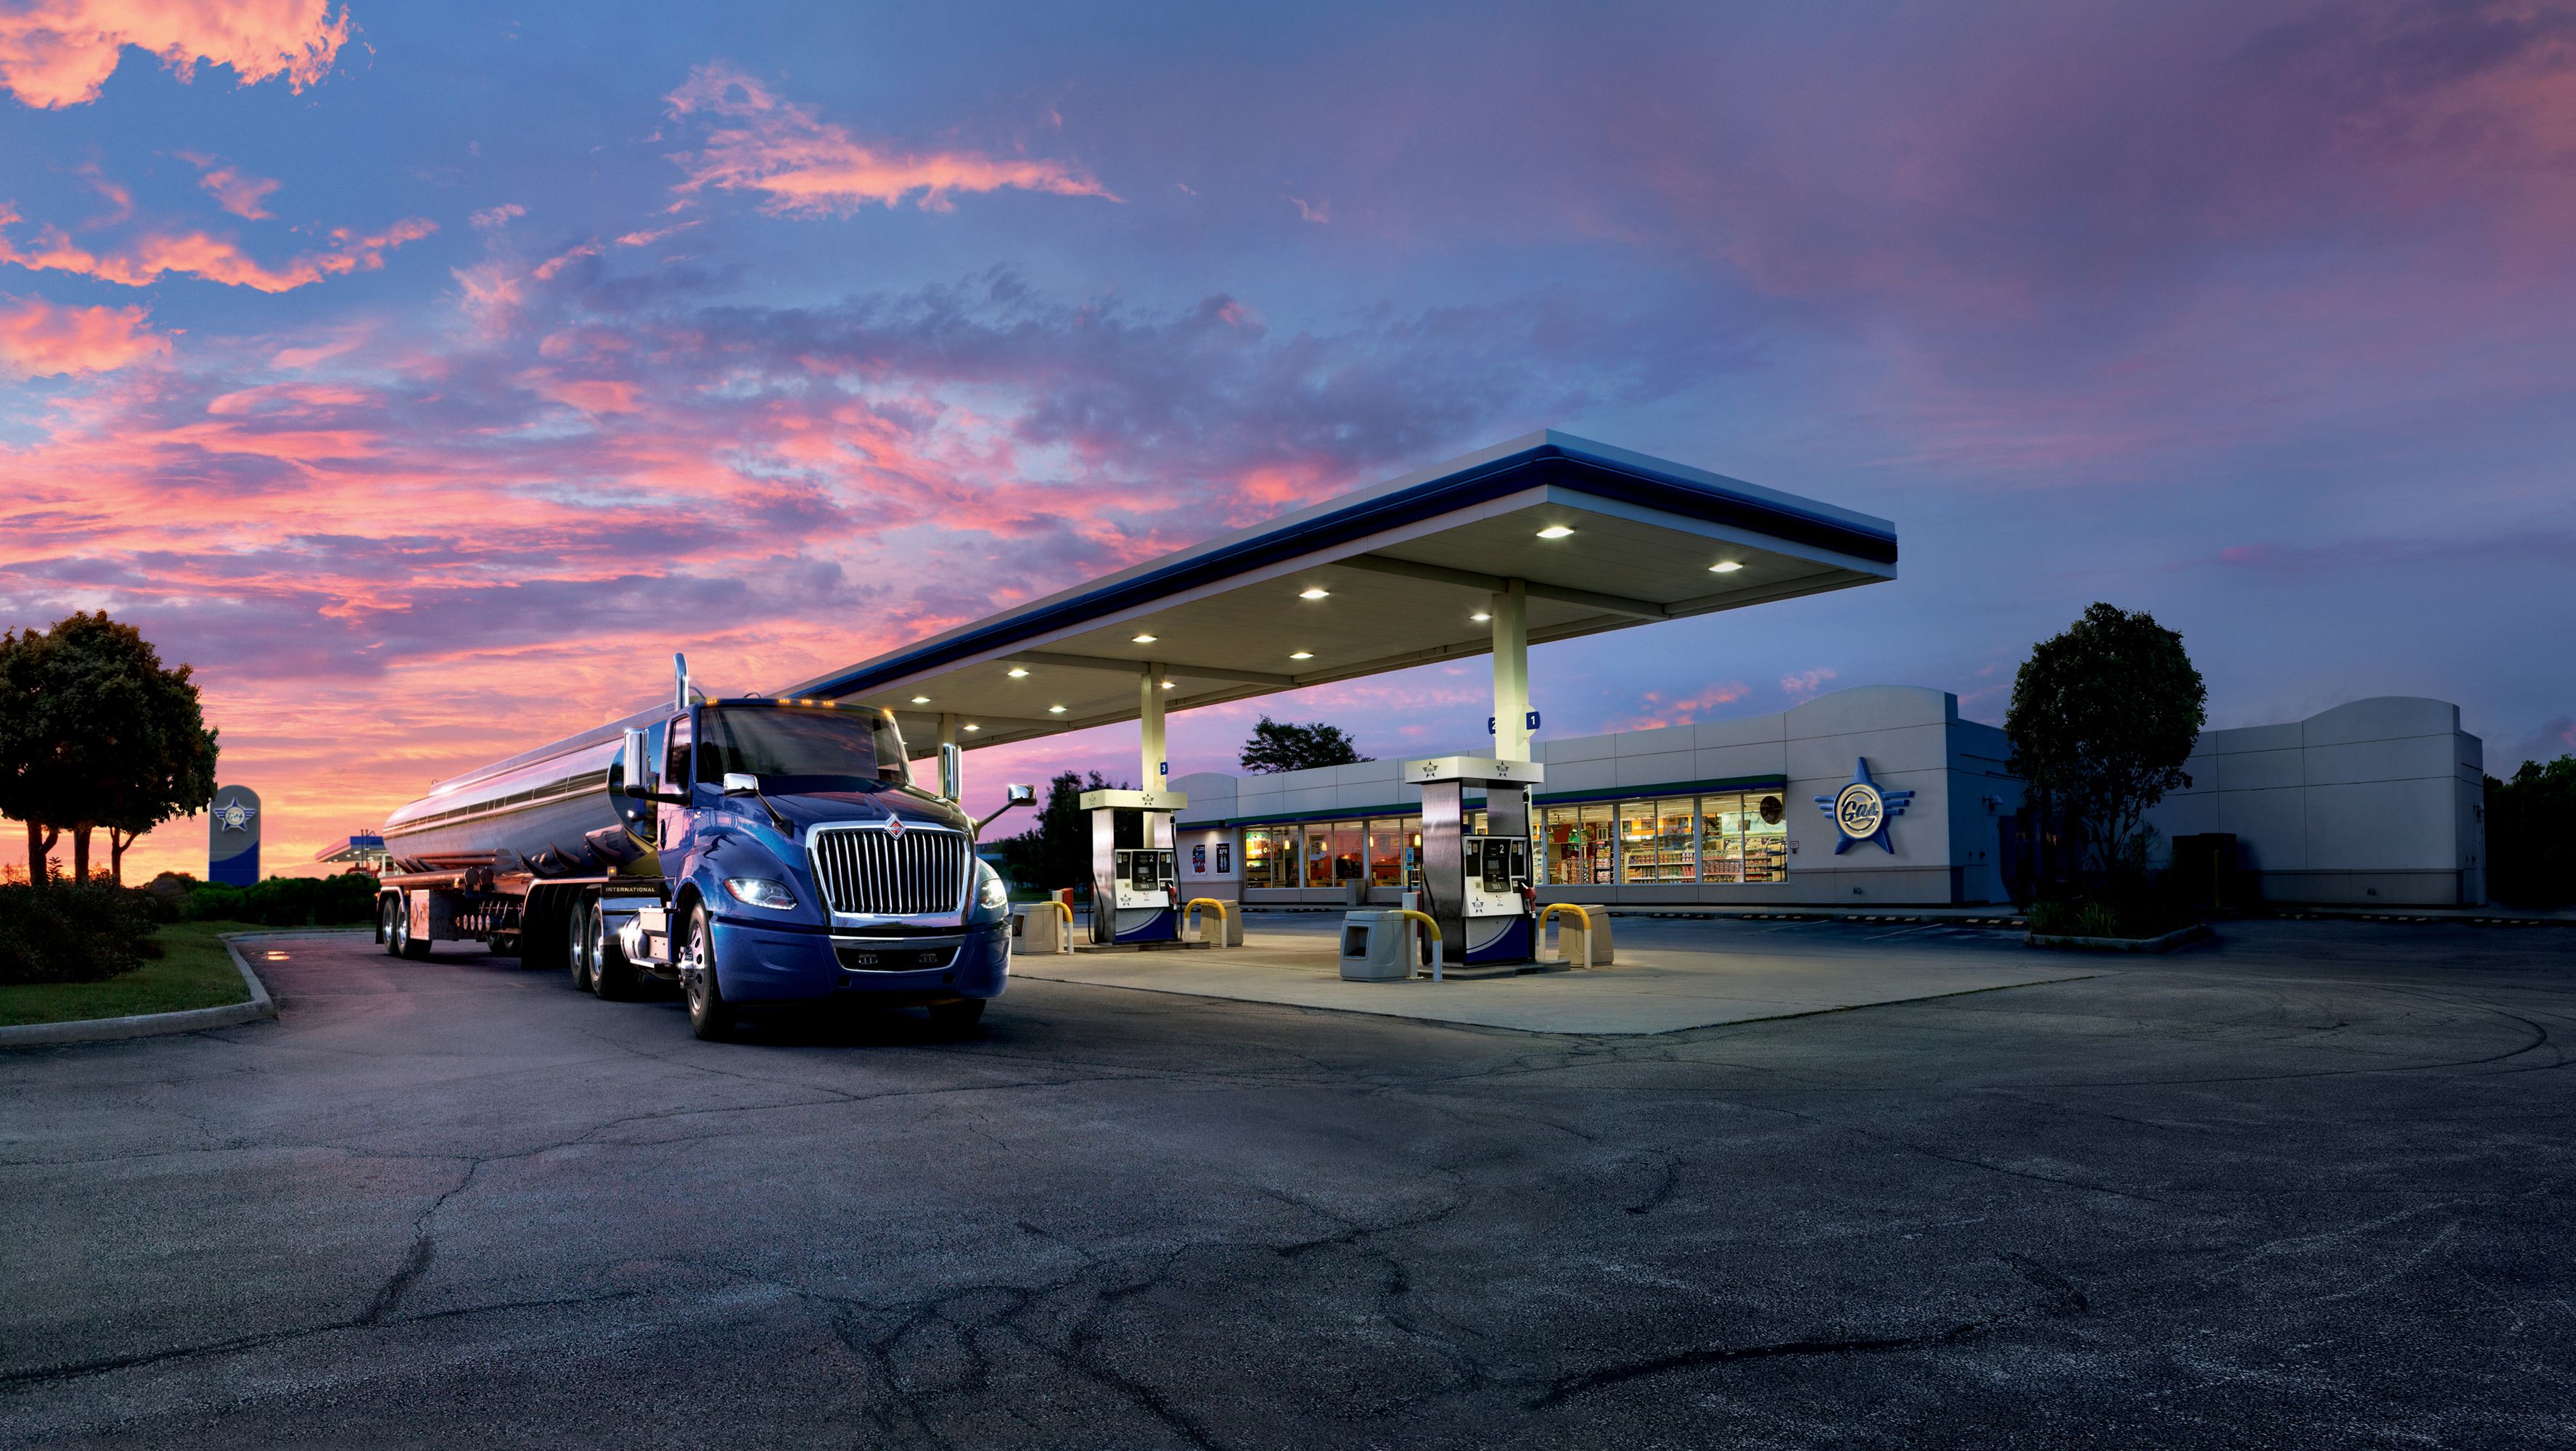 Big blue truck at the gas station wallpaper and image